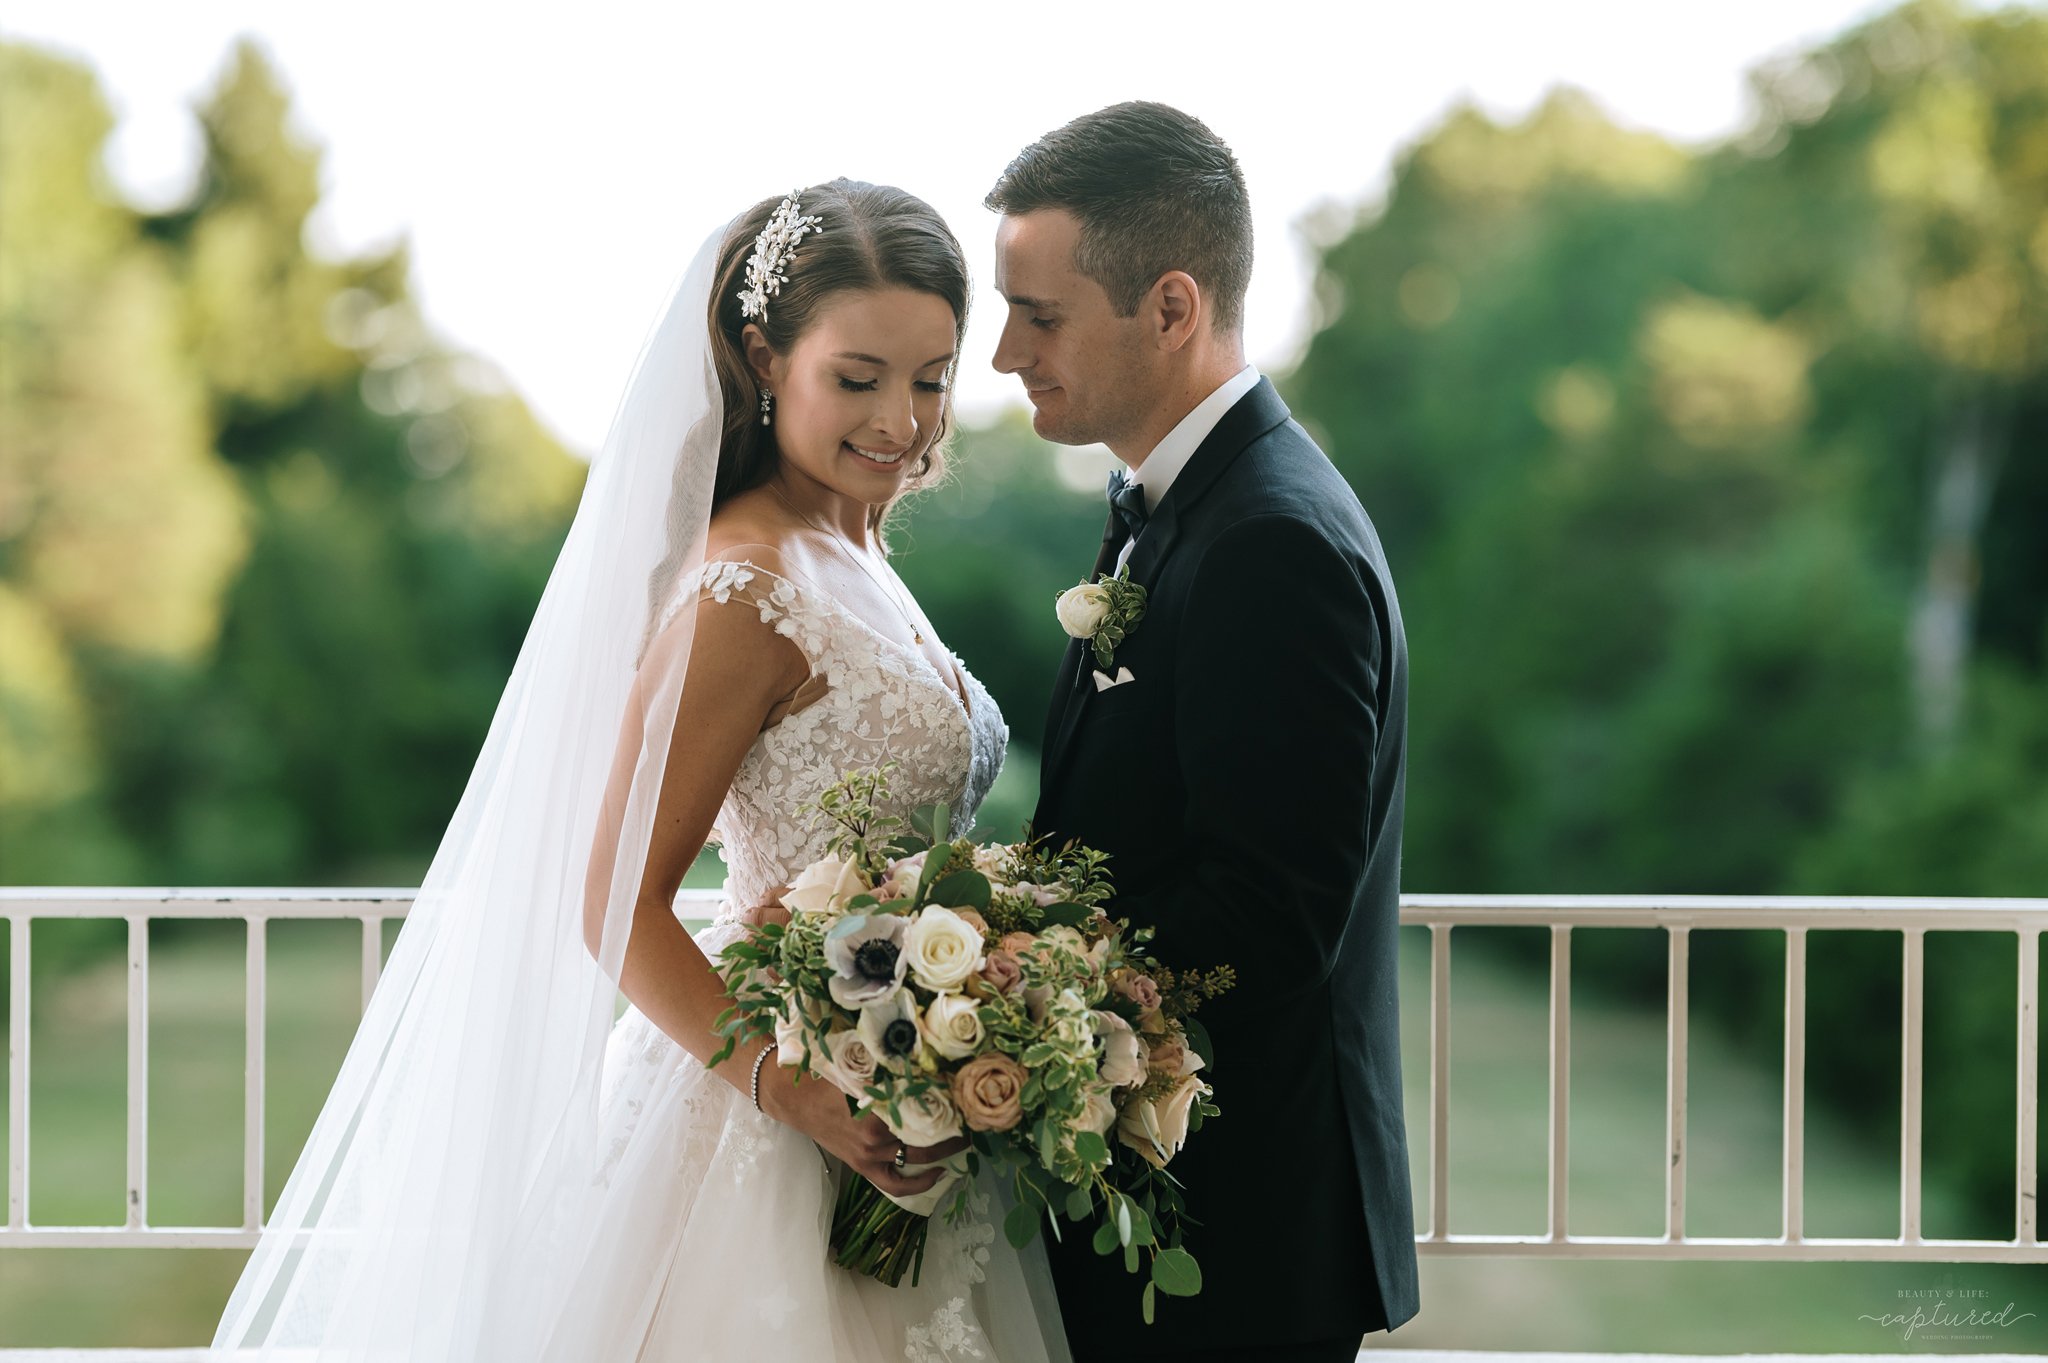 Beauty_and_Life_Captured_Danielle_and_Javier_Wedding_test-96.jpg